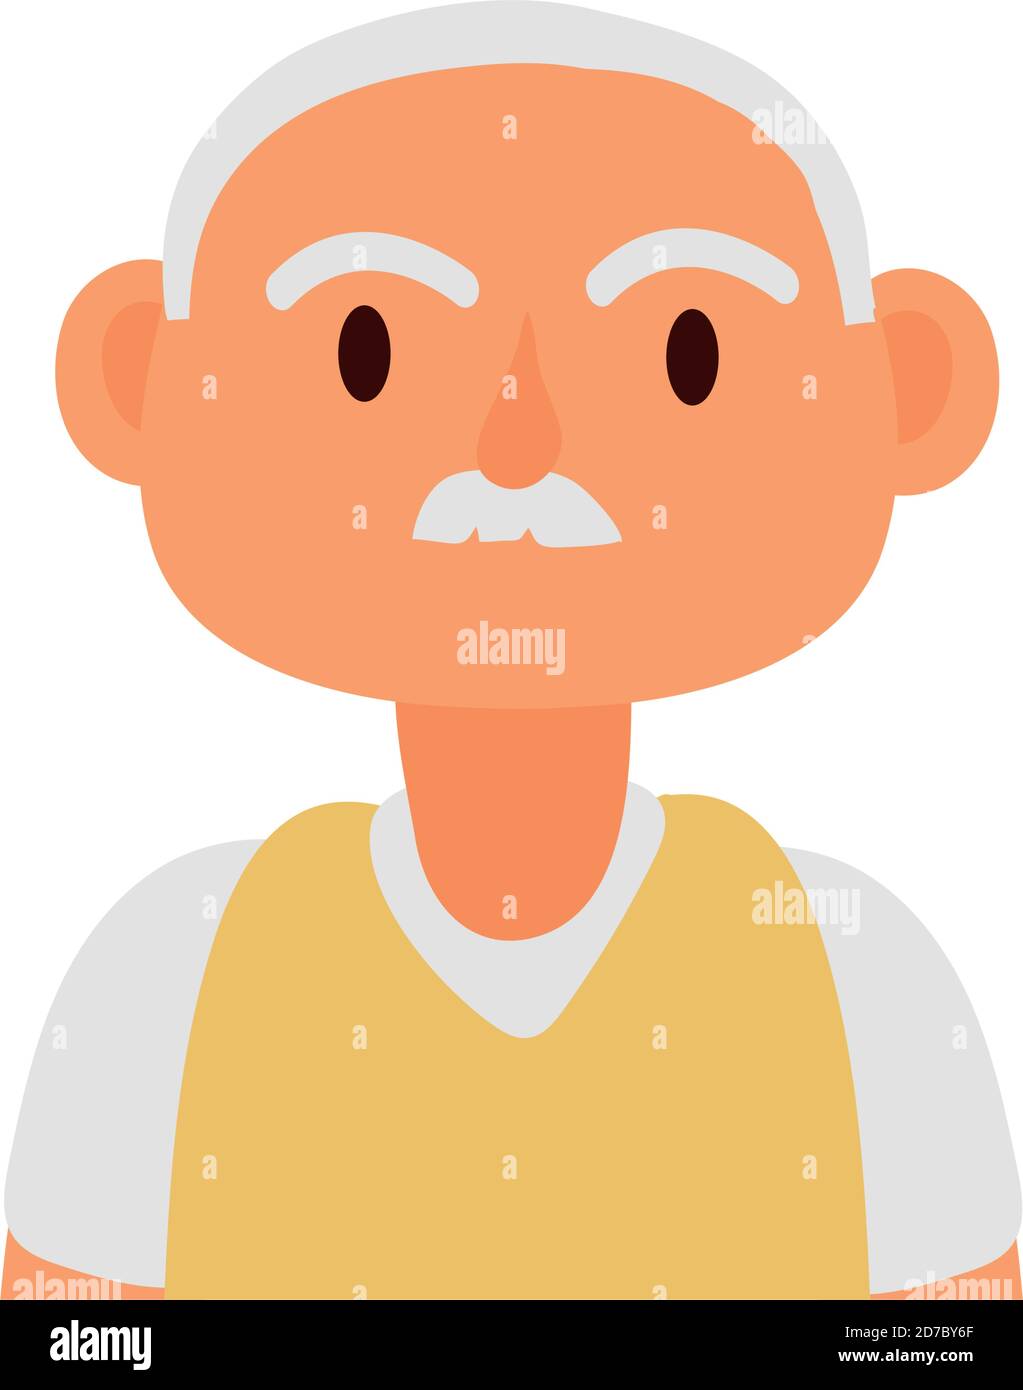 old man person avatar character vector illustration design Stock Vector